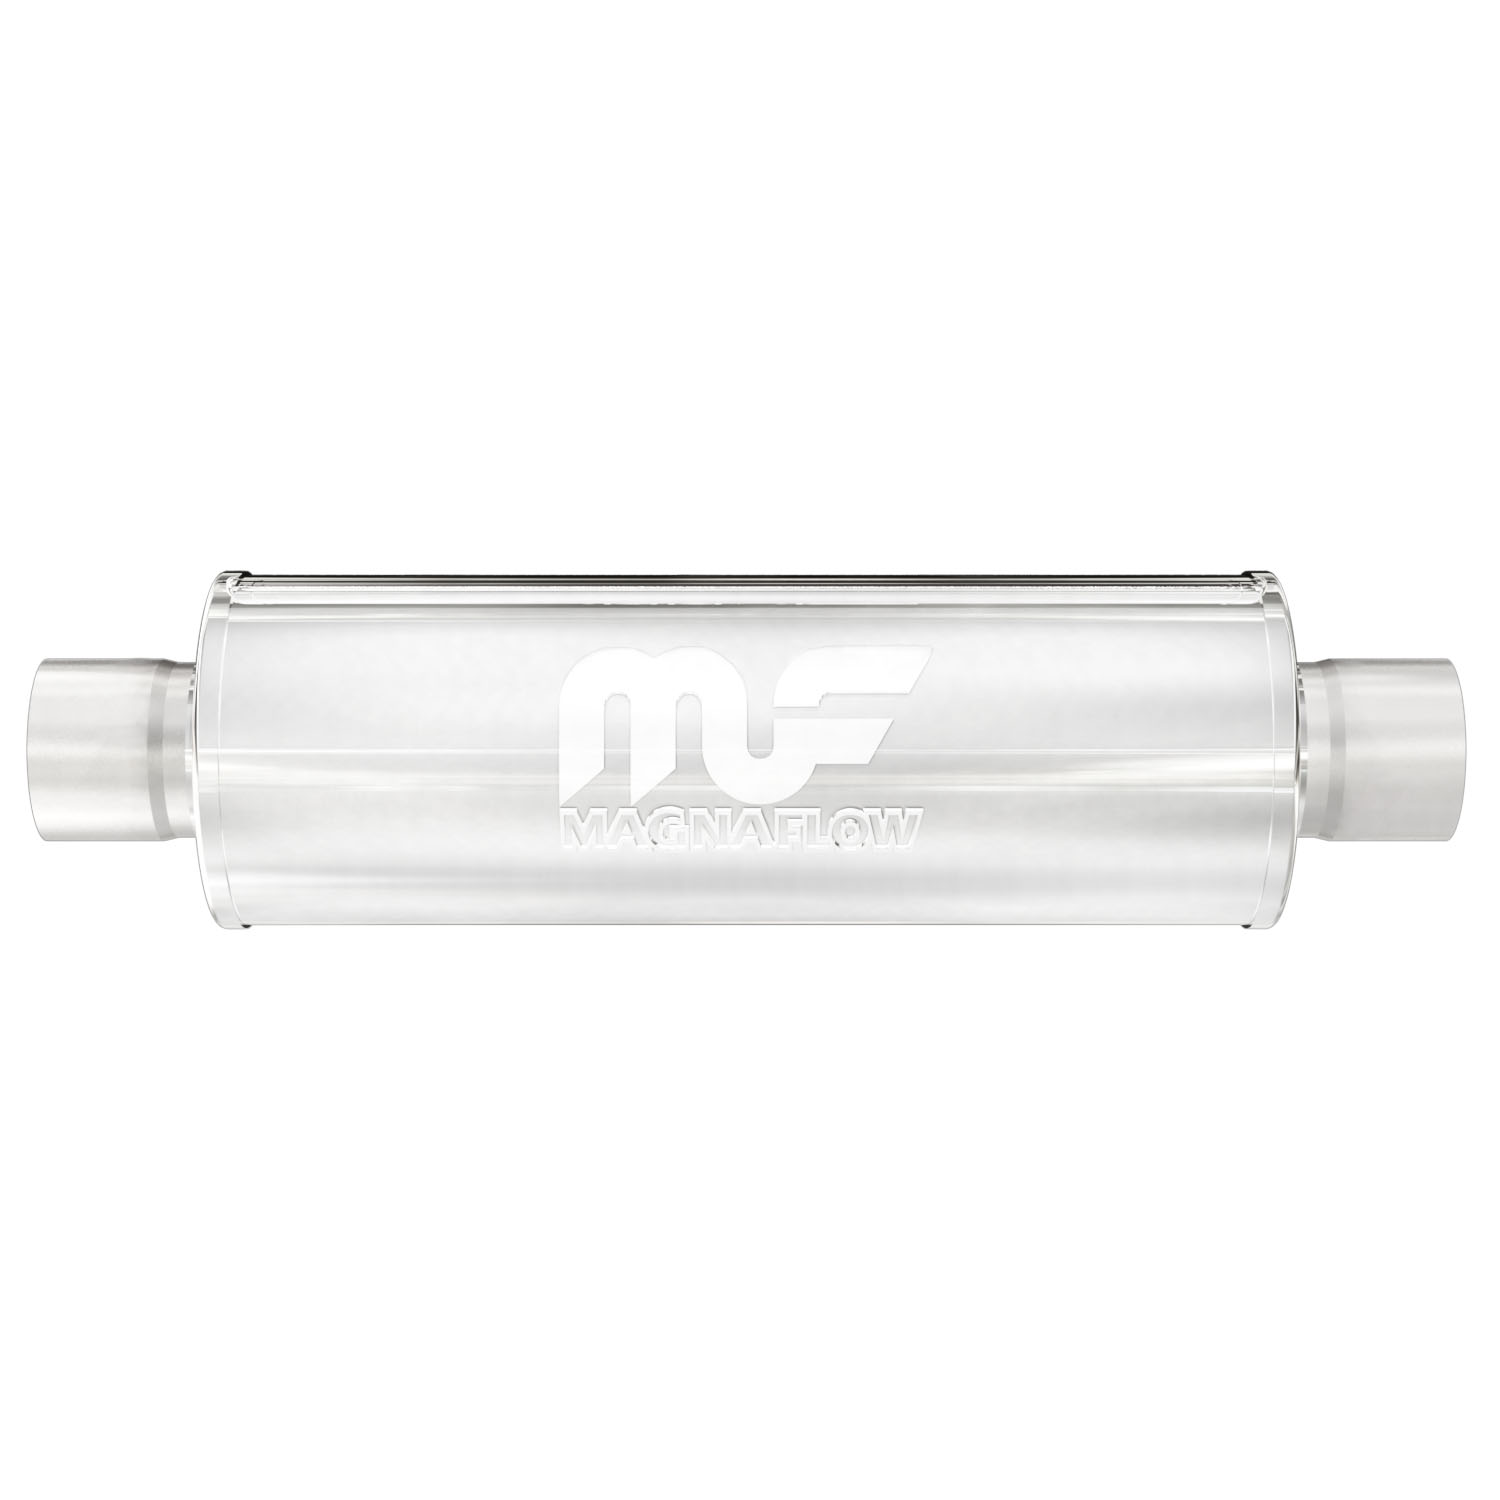 4" Round Muffler Center In/Center Out: 2" Body Length: 14" Overall Length: 20" Core Size: 2.5" Polished Finish